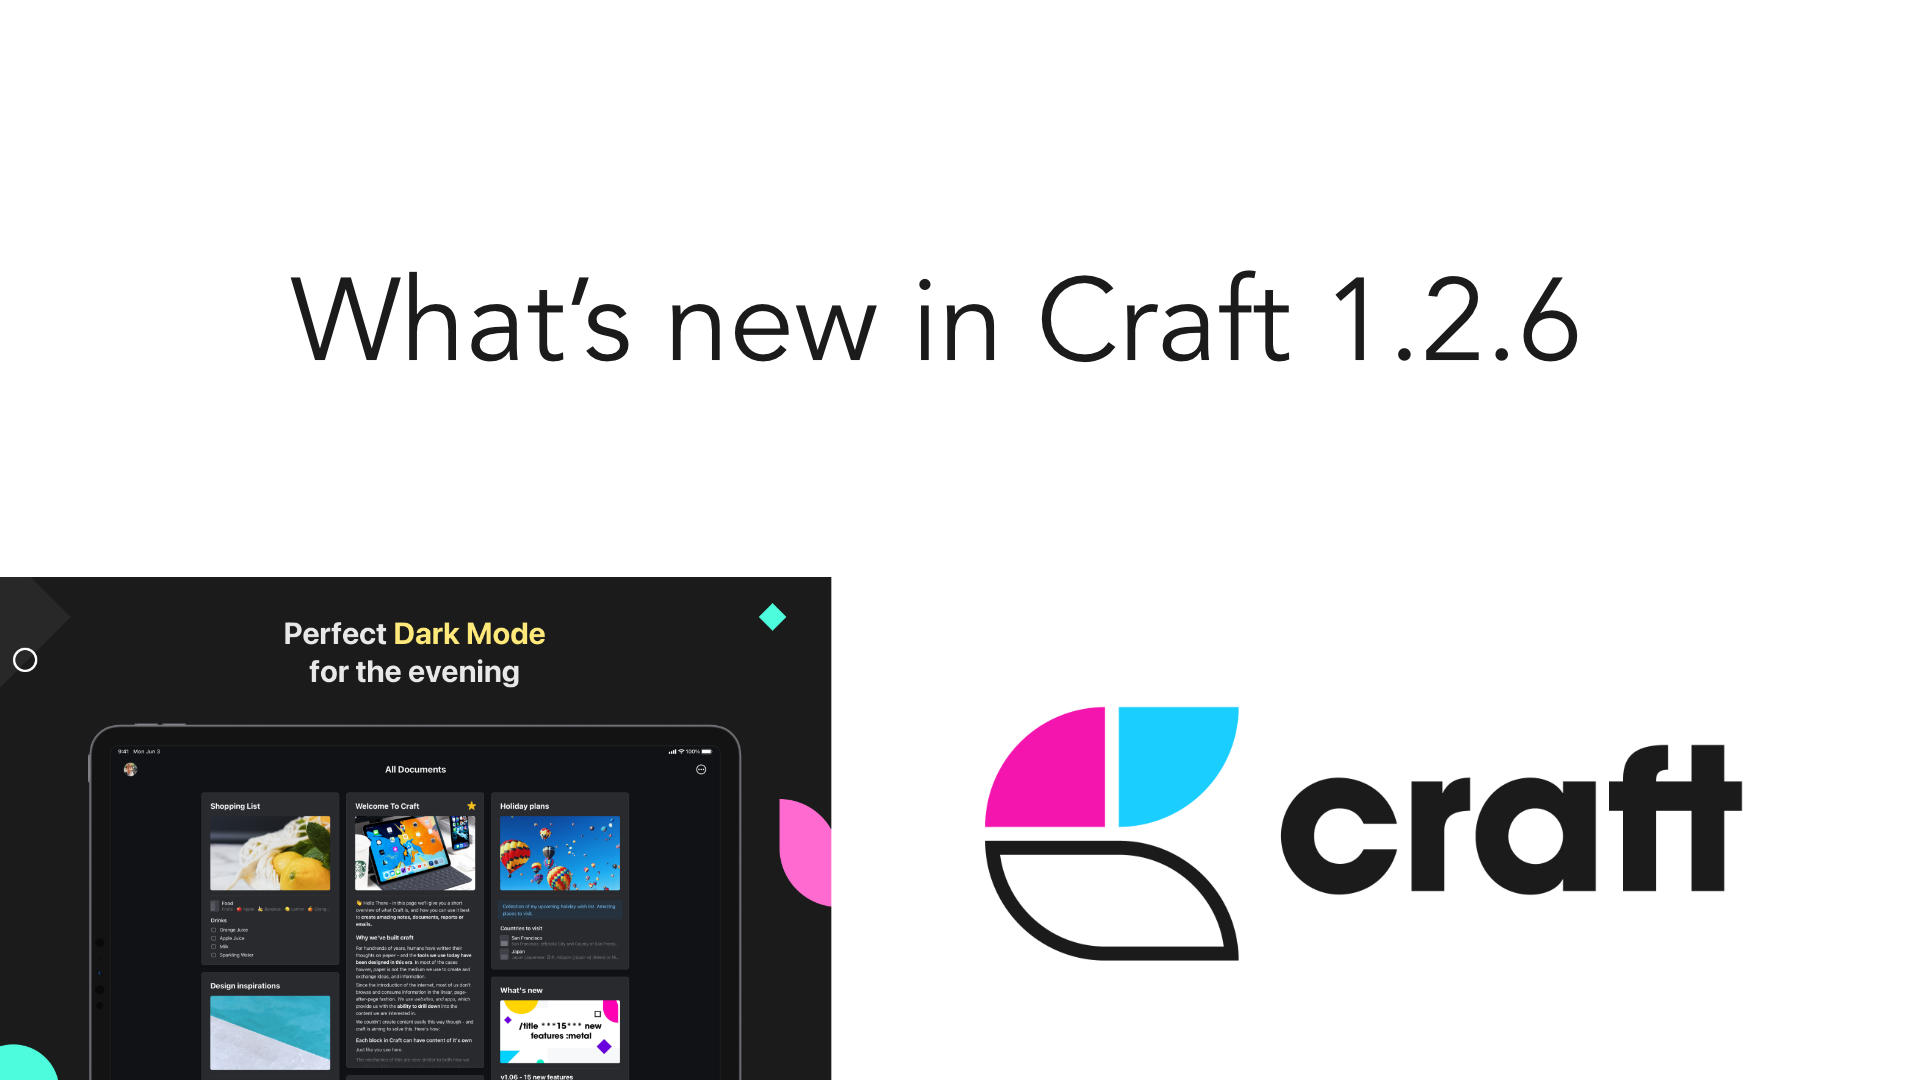 What’s new in Craft 1.2.6